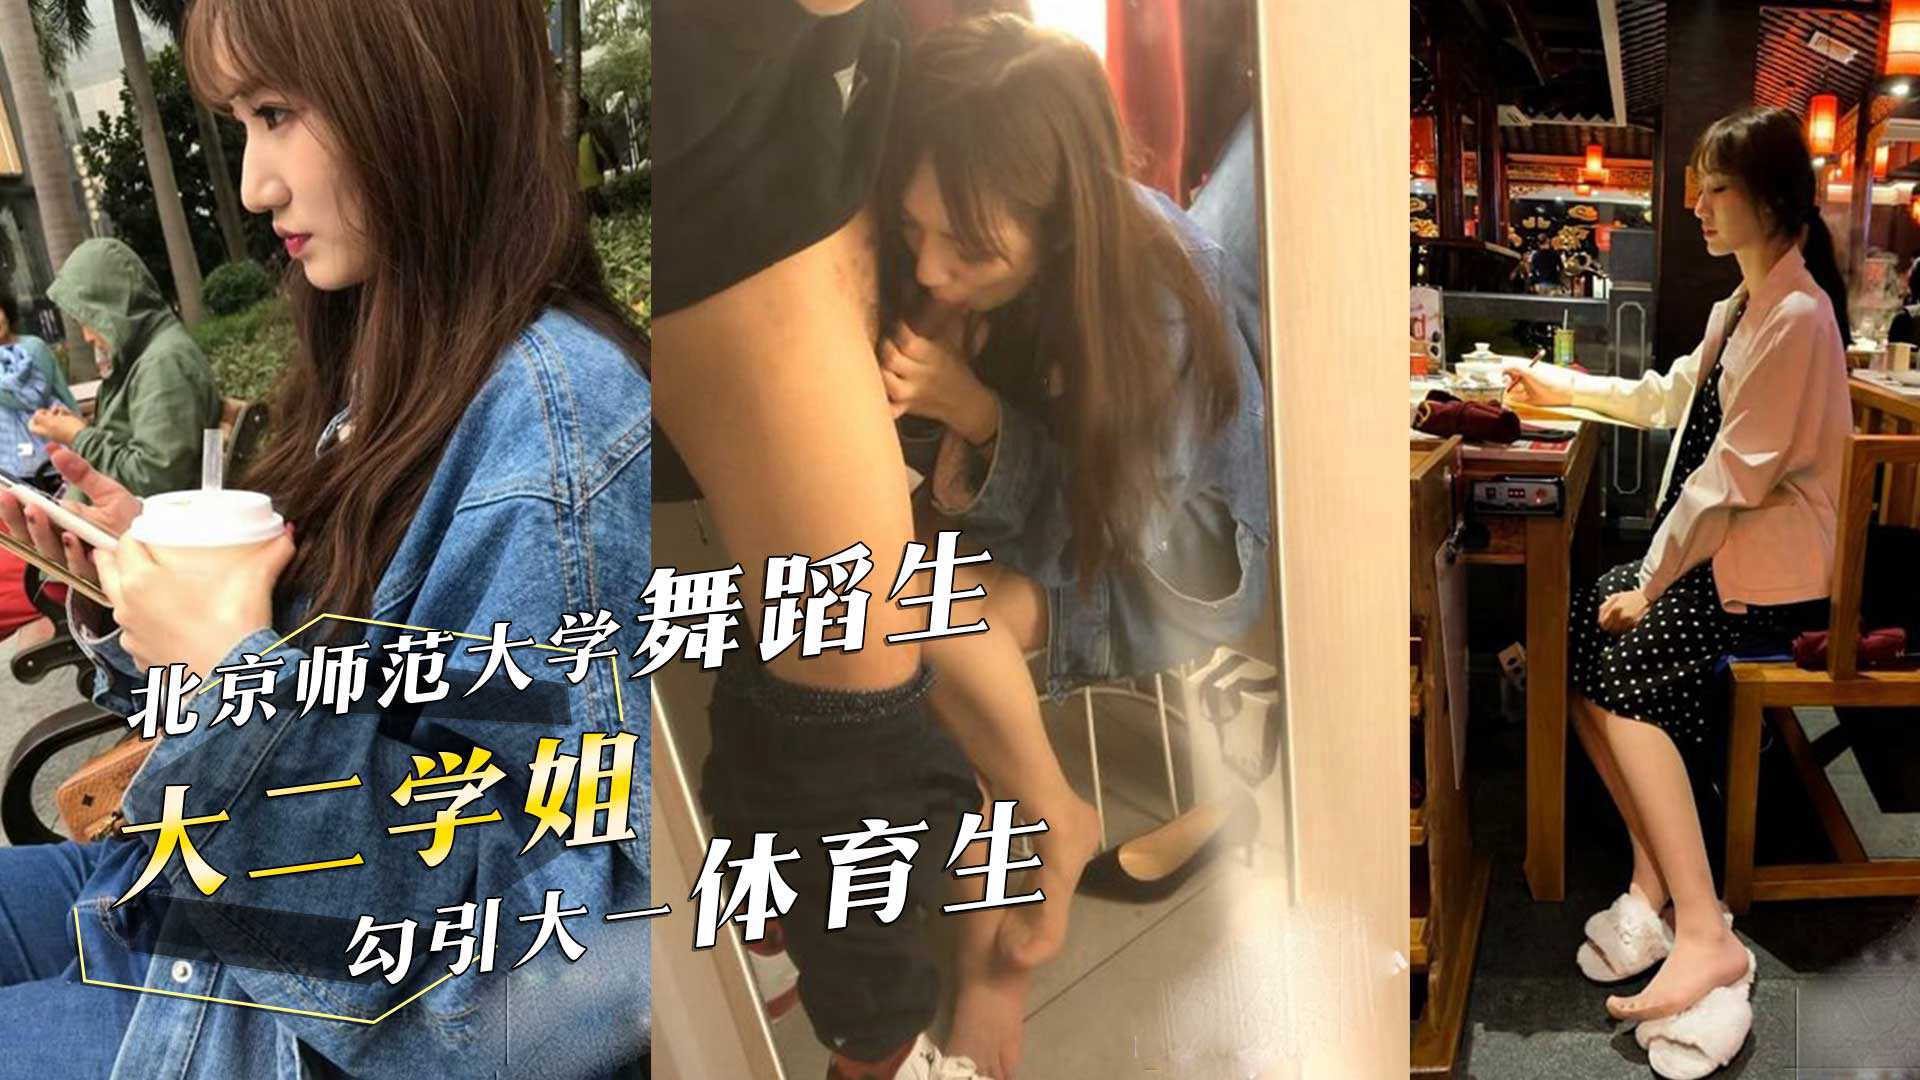 Beijing teaching university dancer, secondary school sister seduced a great athlete student, in the trial room passionate match matching aircraft!